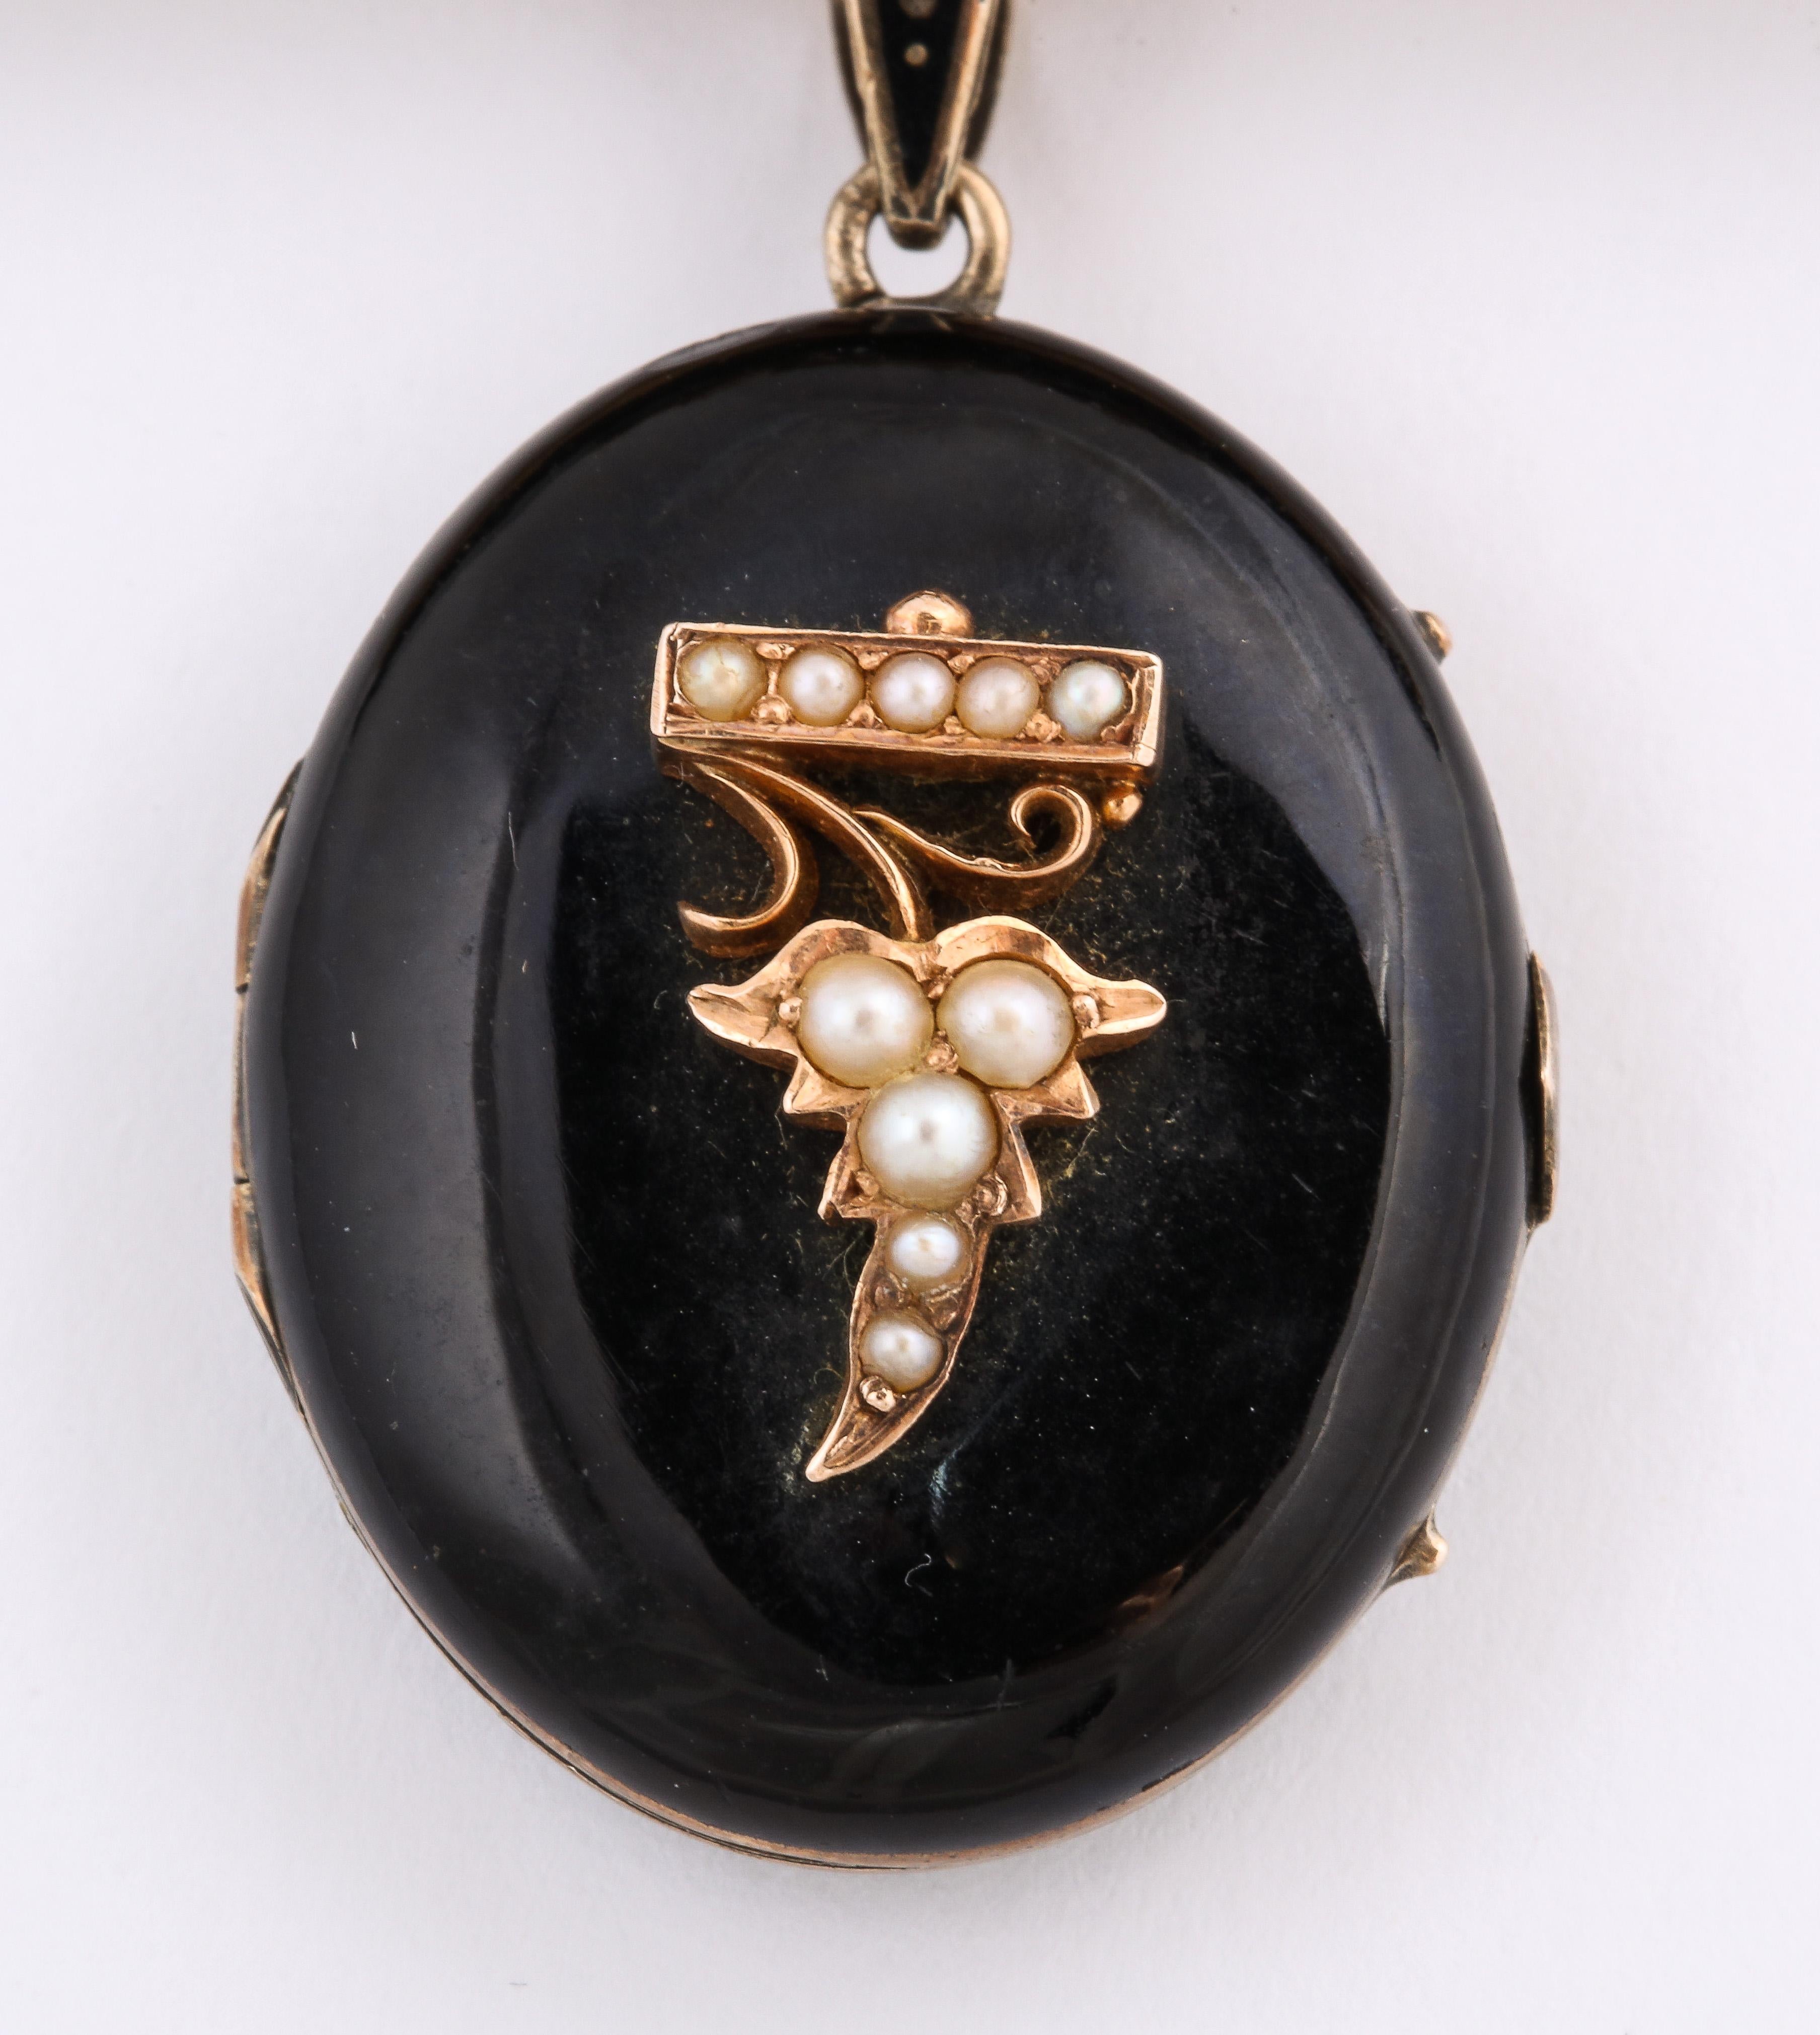 A length of onyx, 14 Kt gold and natural pearls, suspends an enamel locket with its small bale dotted with gold. At top the pearls seem to be cupid's arrow pointing to the bunch of pearl grapes on the locket below. Pearls symbolize tears and thus